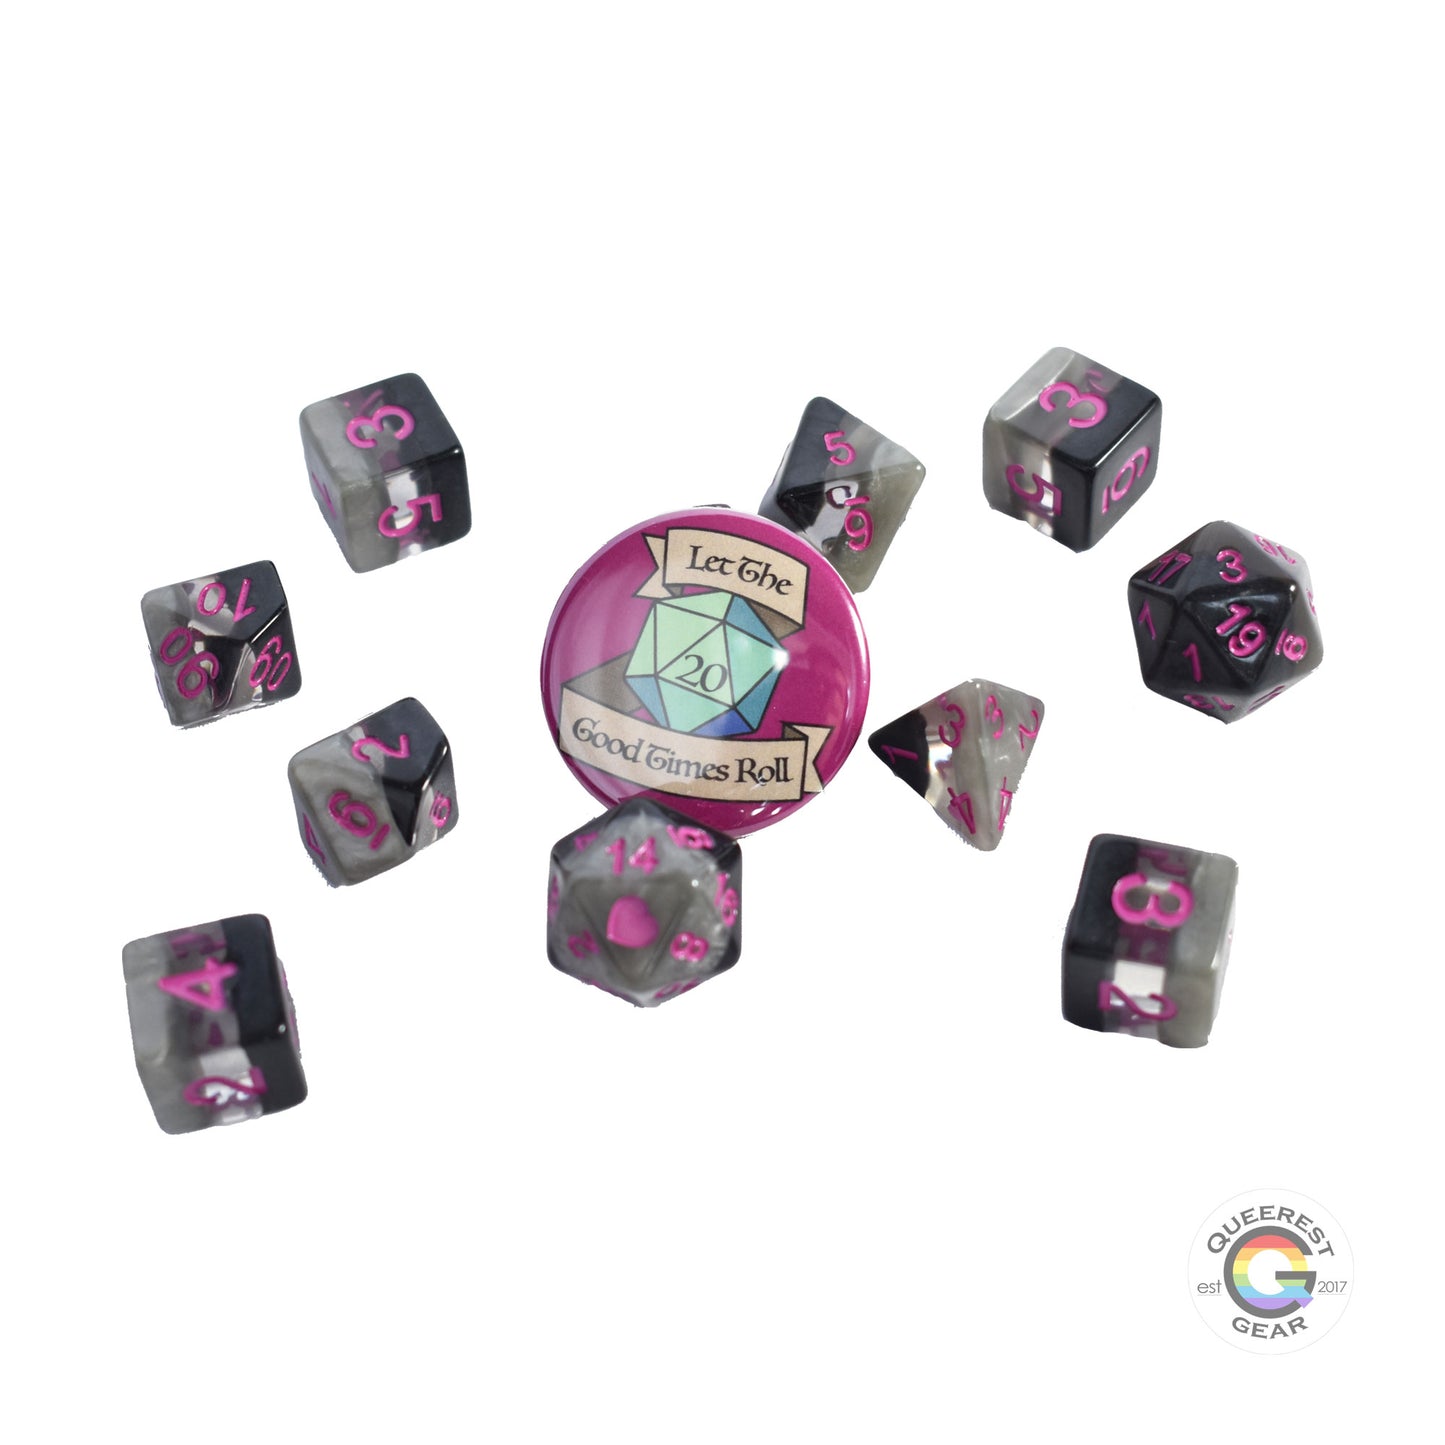 11 piece set of polyhedral dice scattered on a white background. They are transparent and colored in the stripes of the demisexual flag with magenta ink. There is the freebie “let the good times roll” pinback button among them. 